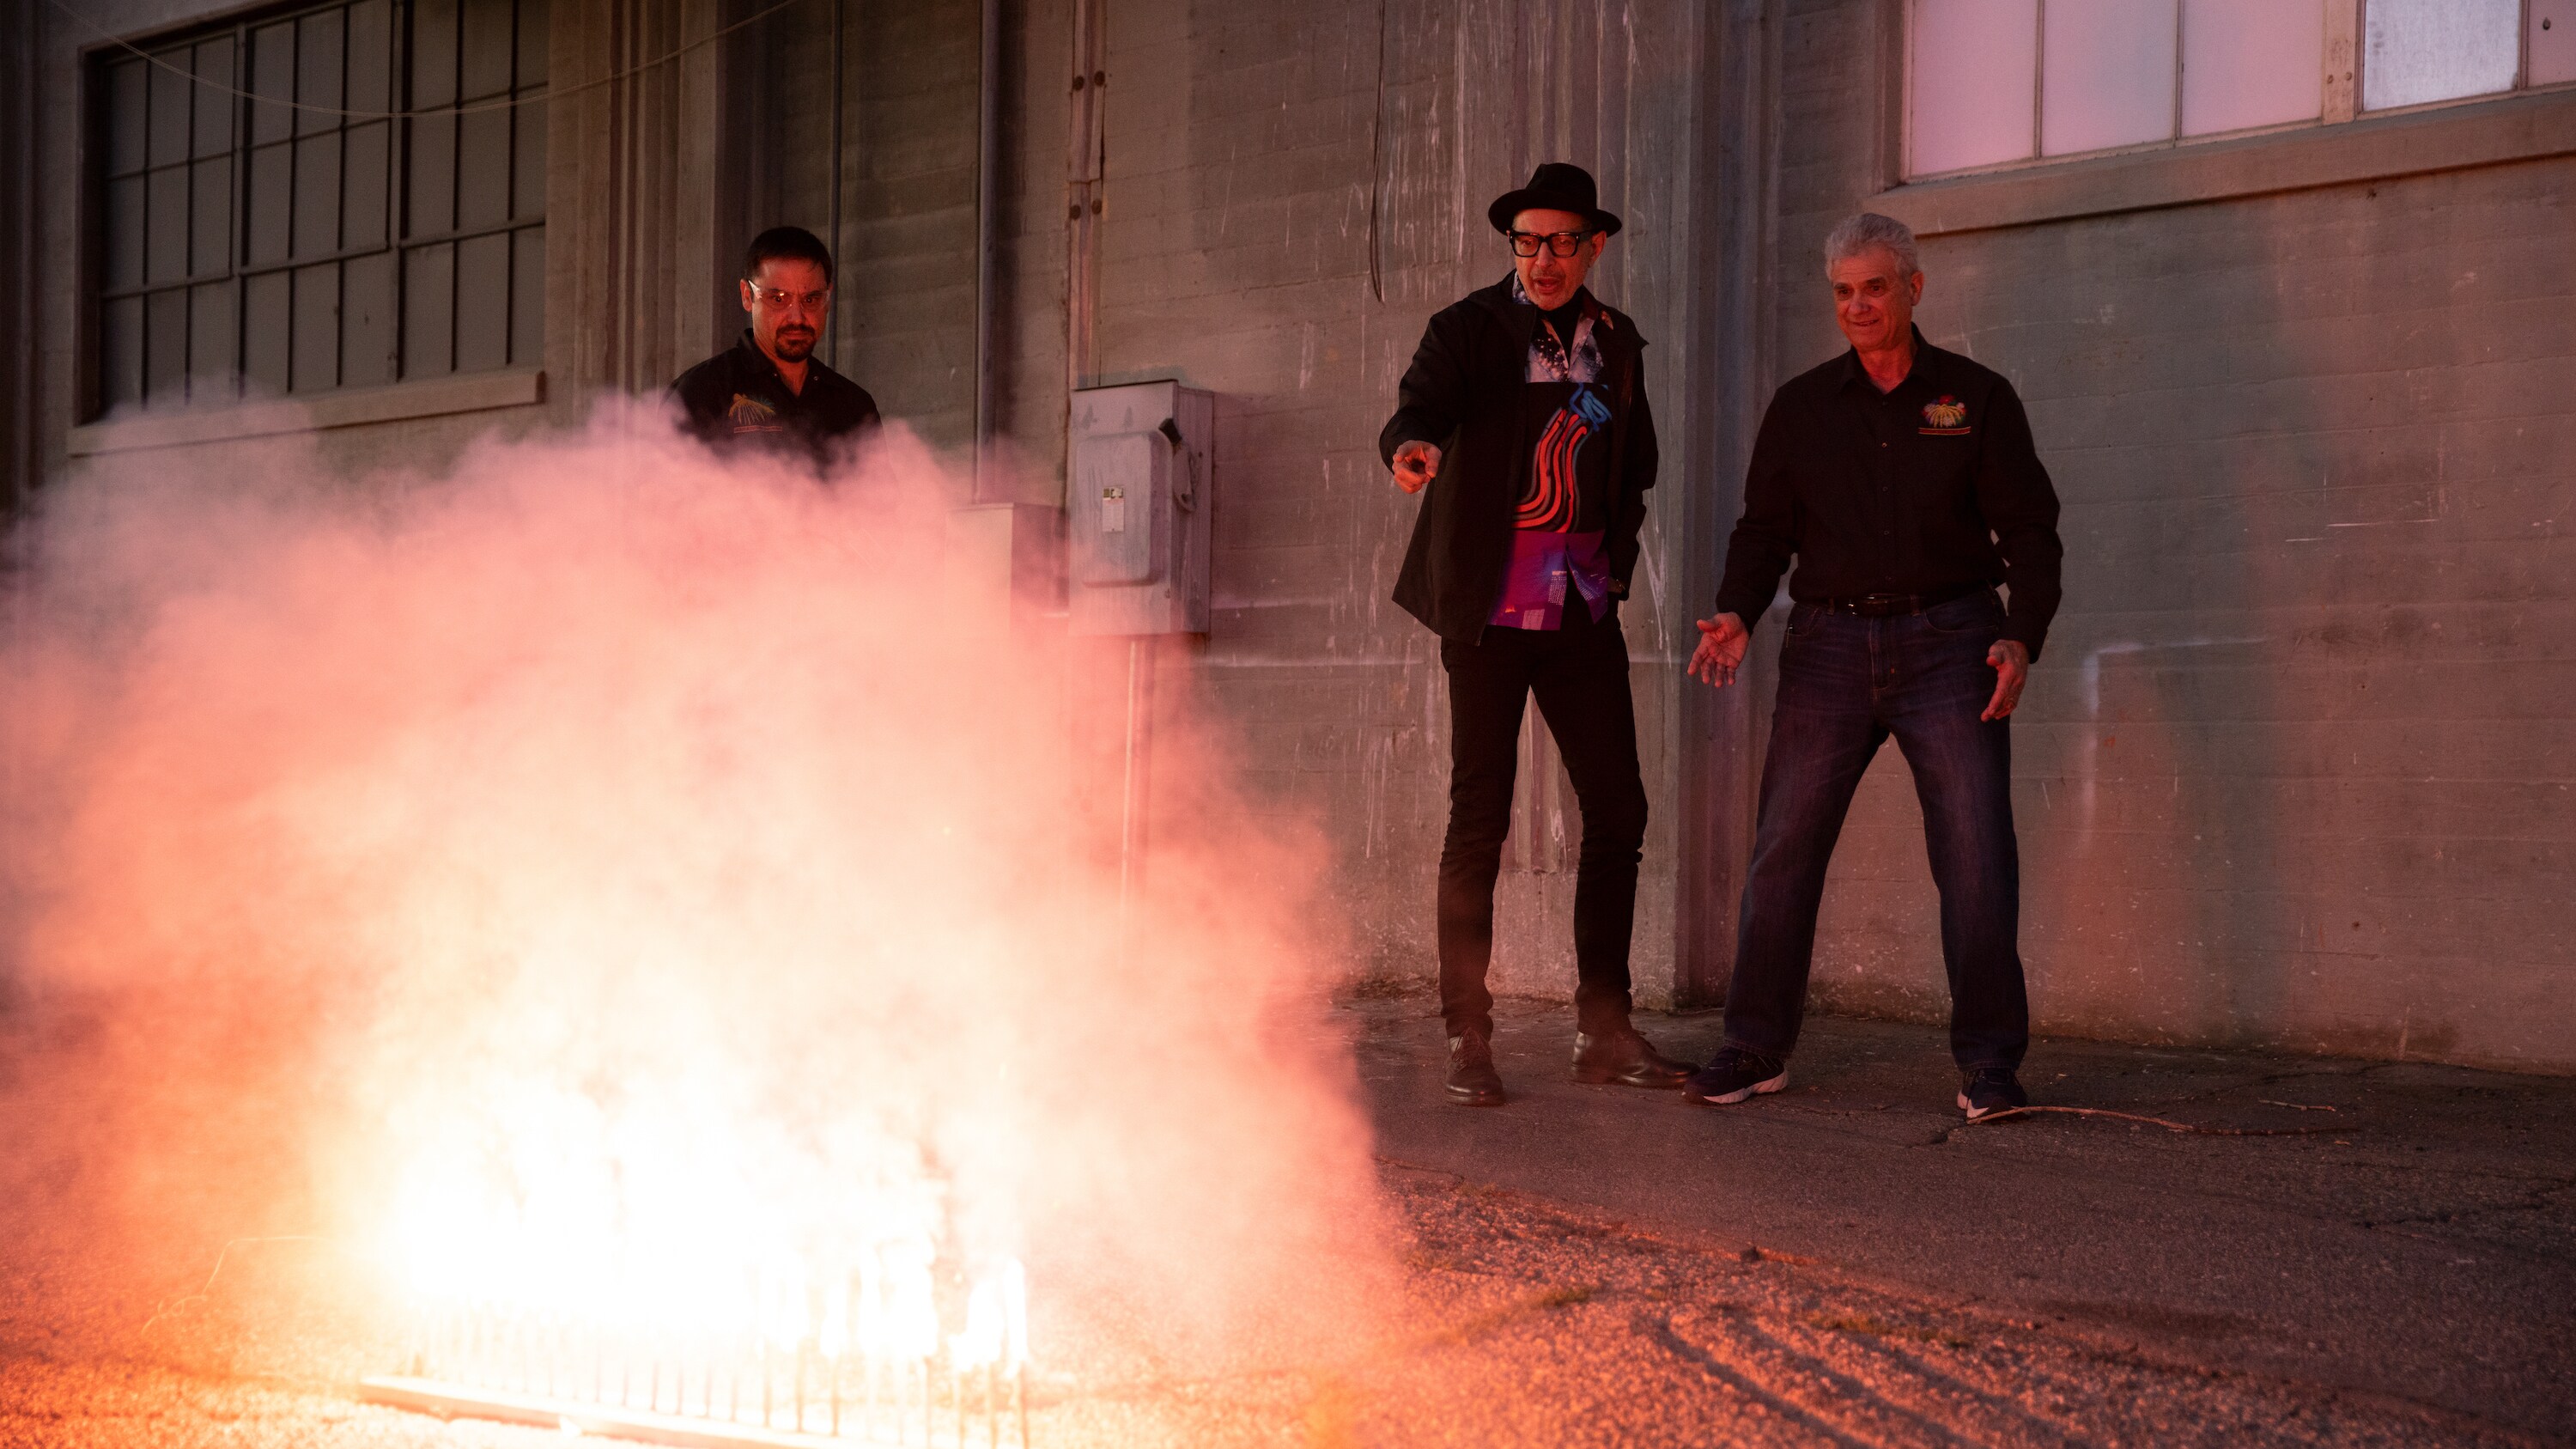 San Bernardino, CA - Jeff Goldblum (center) and Chris Souza (R) watch a small ground level fireworks display being controlled by a Pyro Spectacular employee (L). (Credit: National Geographic/Justin Koenen)